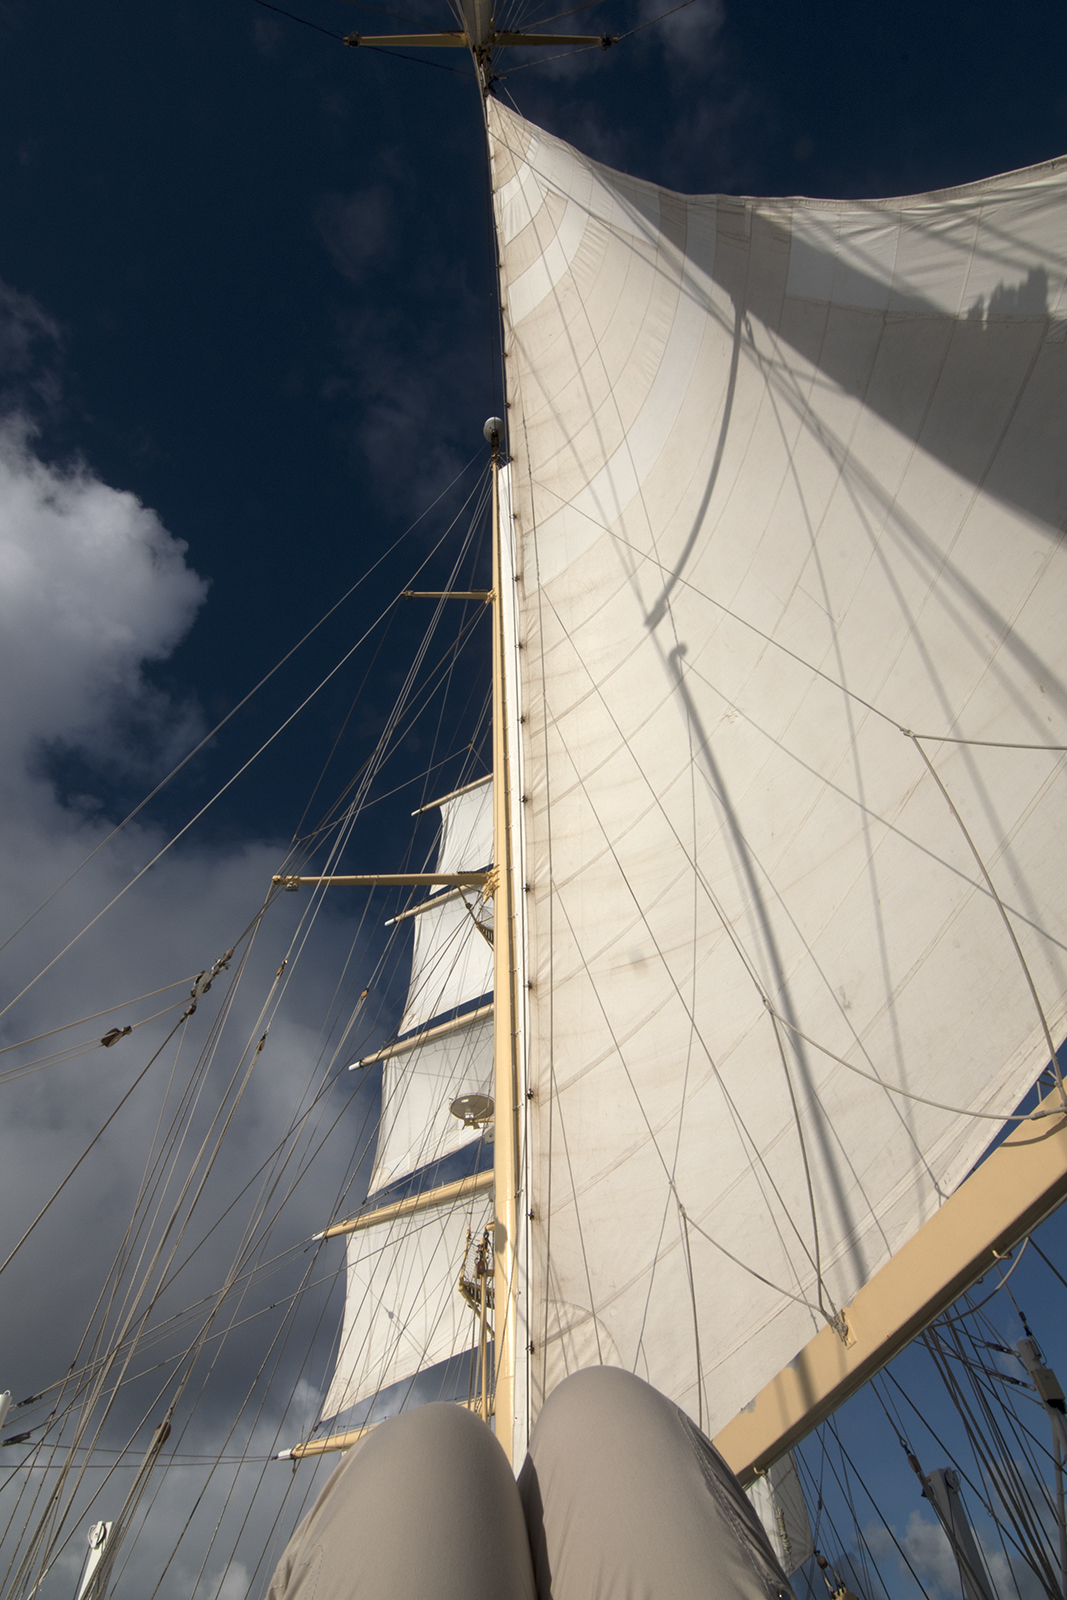 Lounging on deck, looking up at the sails and the sky. Photograph, Ann Fisher.